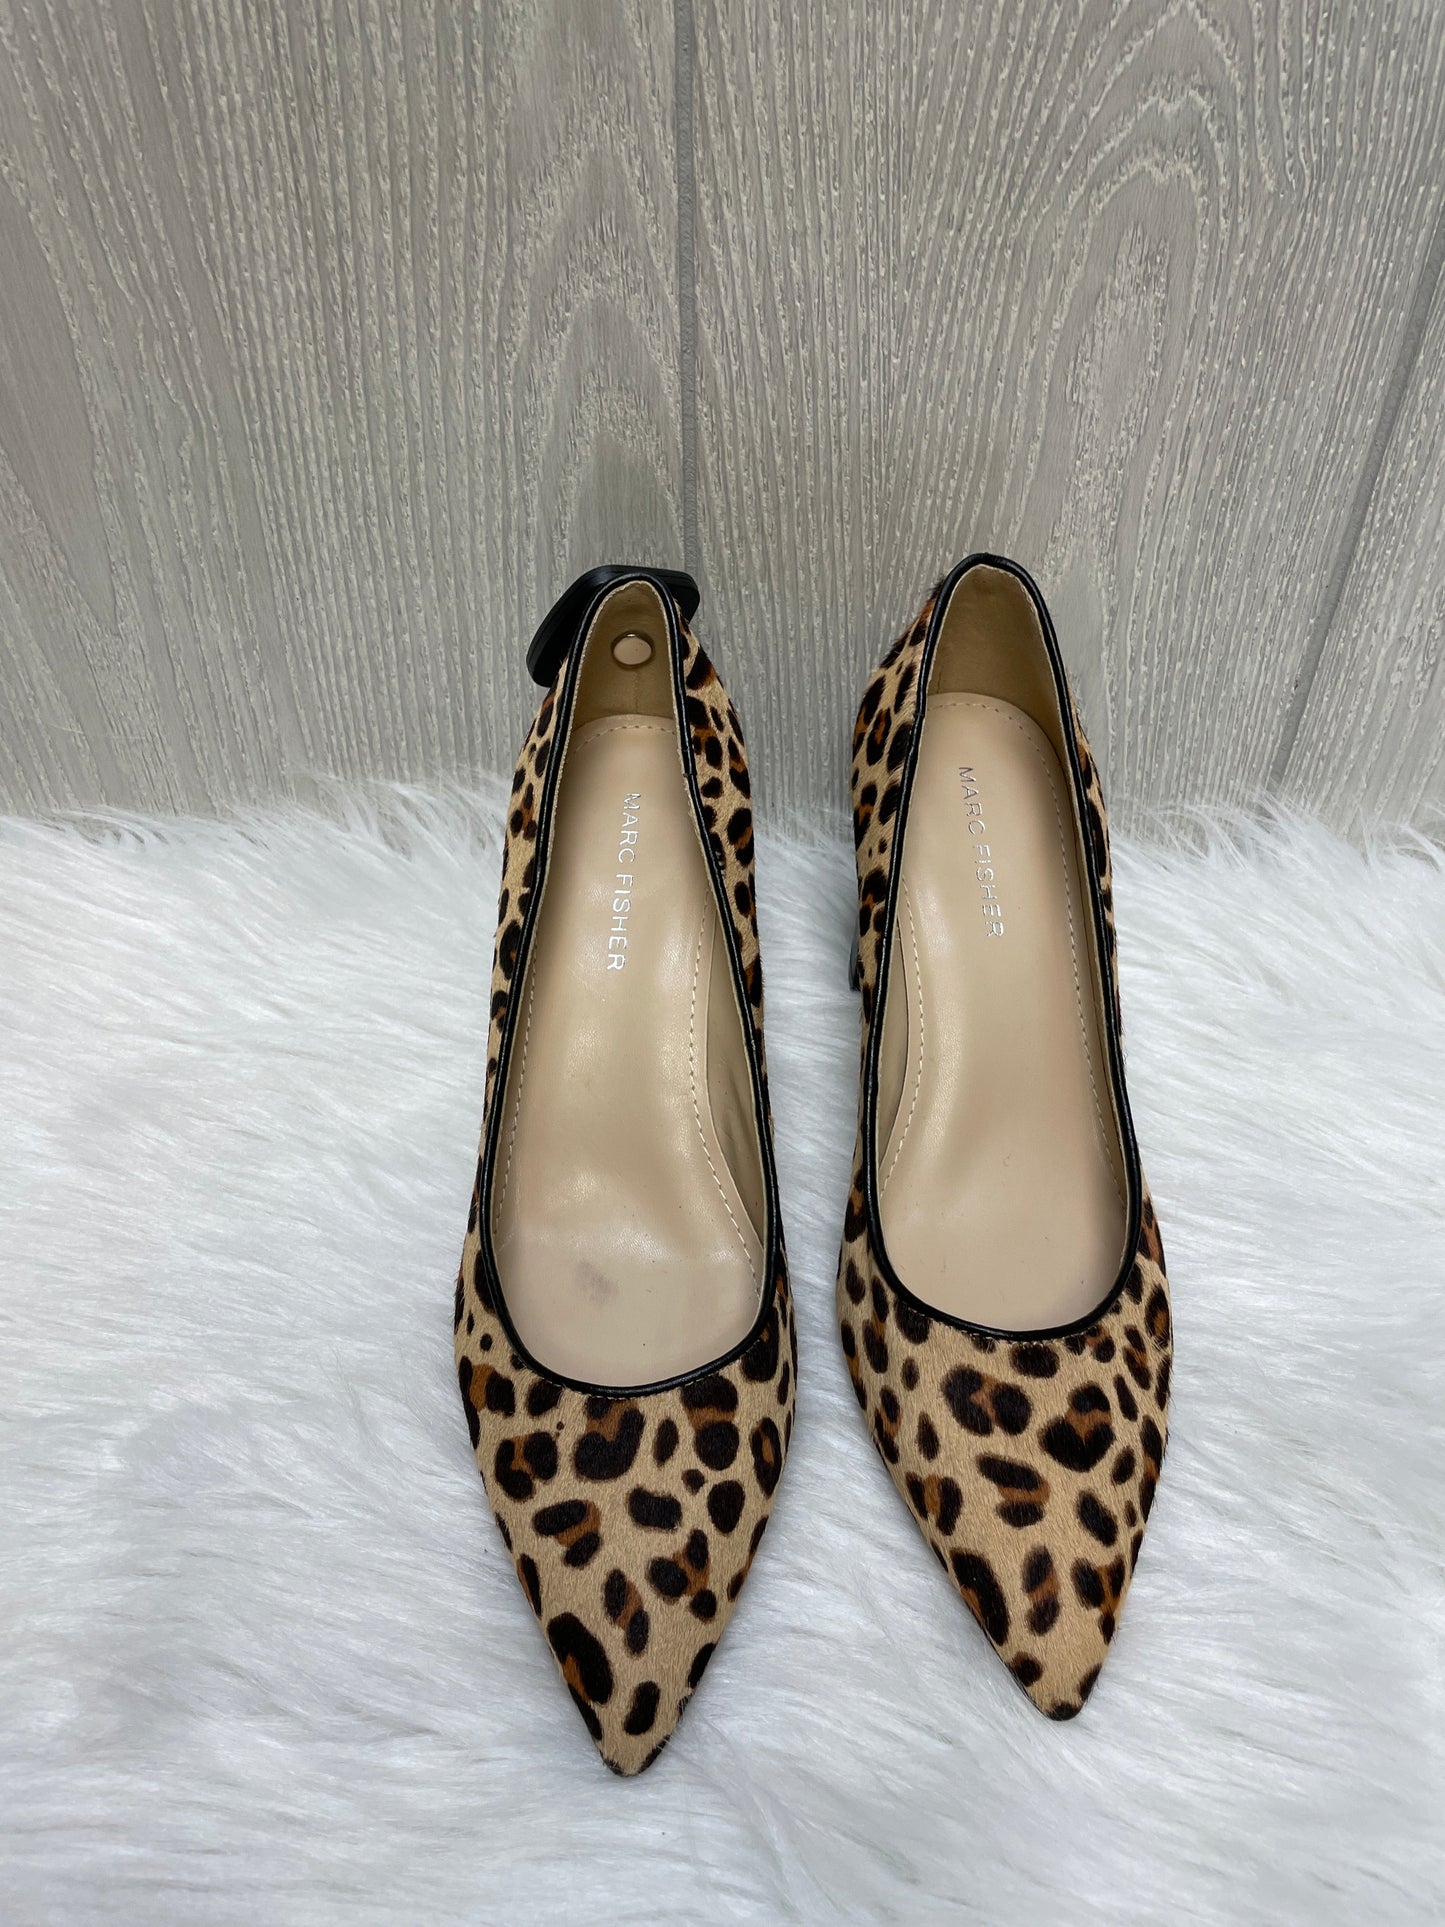 Animal Print Shoes Heels Block Marc Fisher, Size 6.5